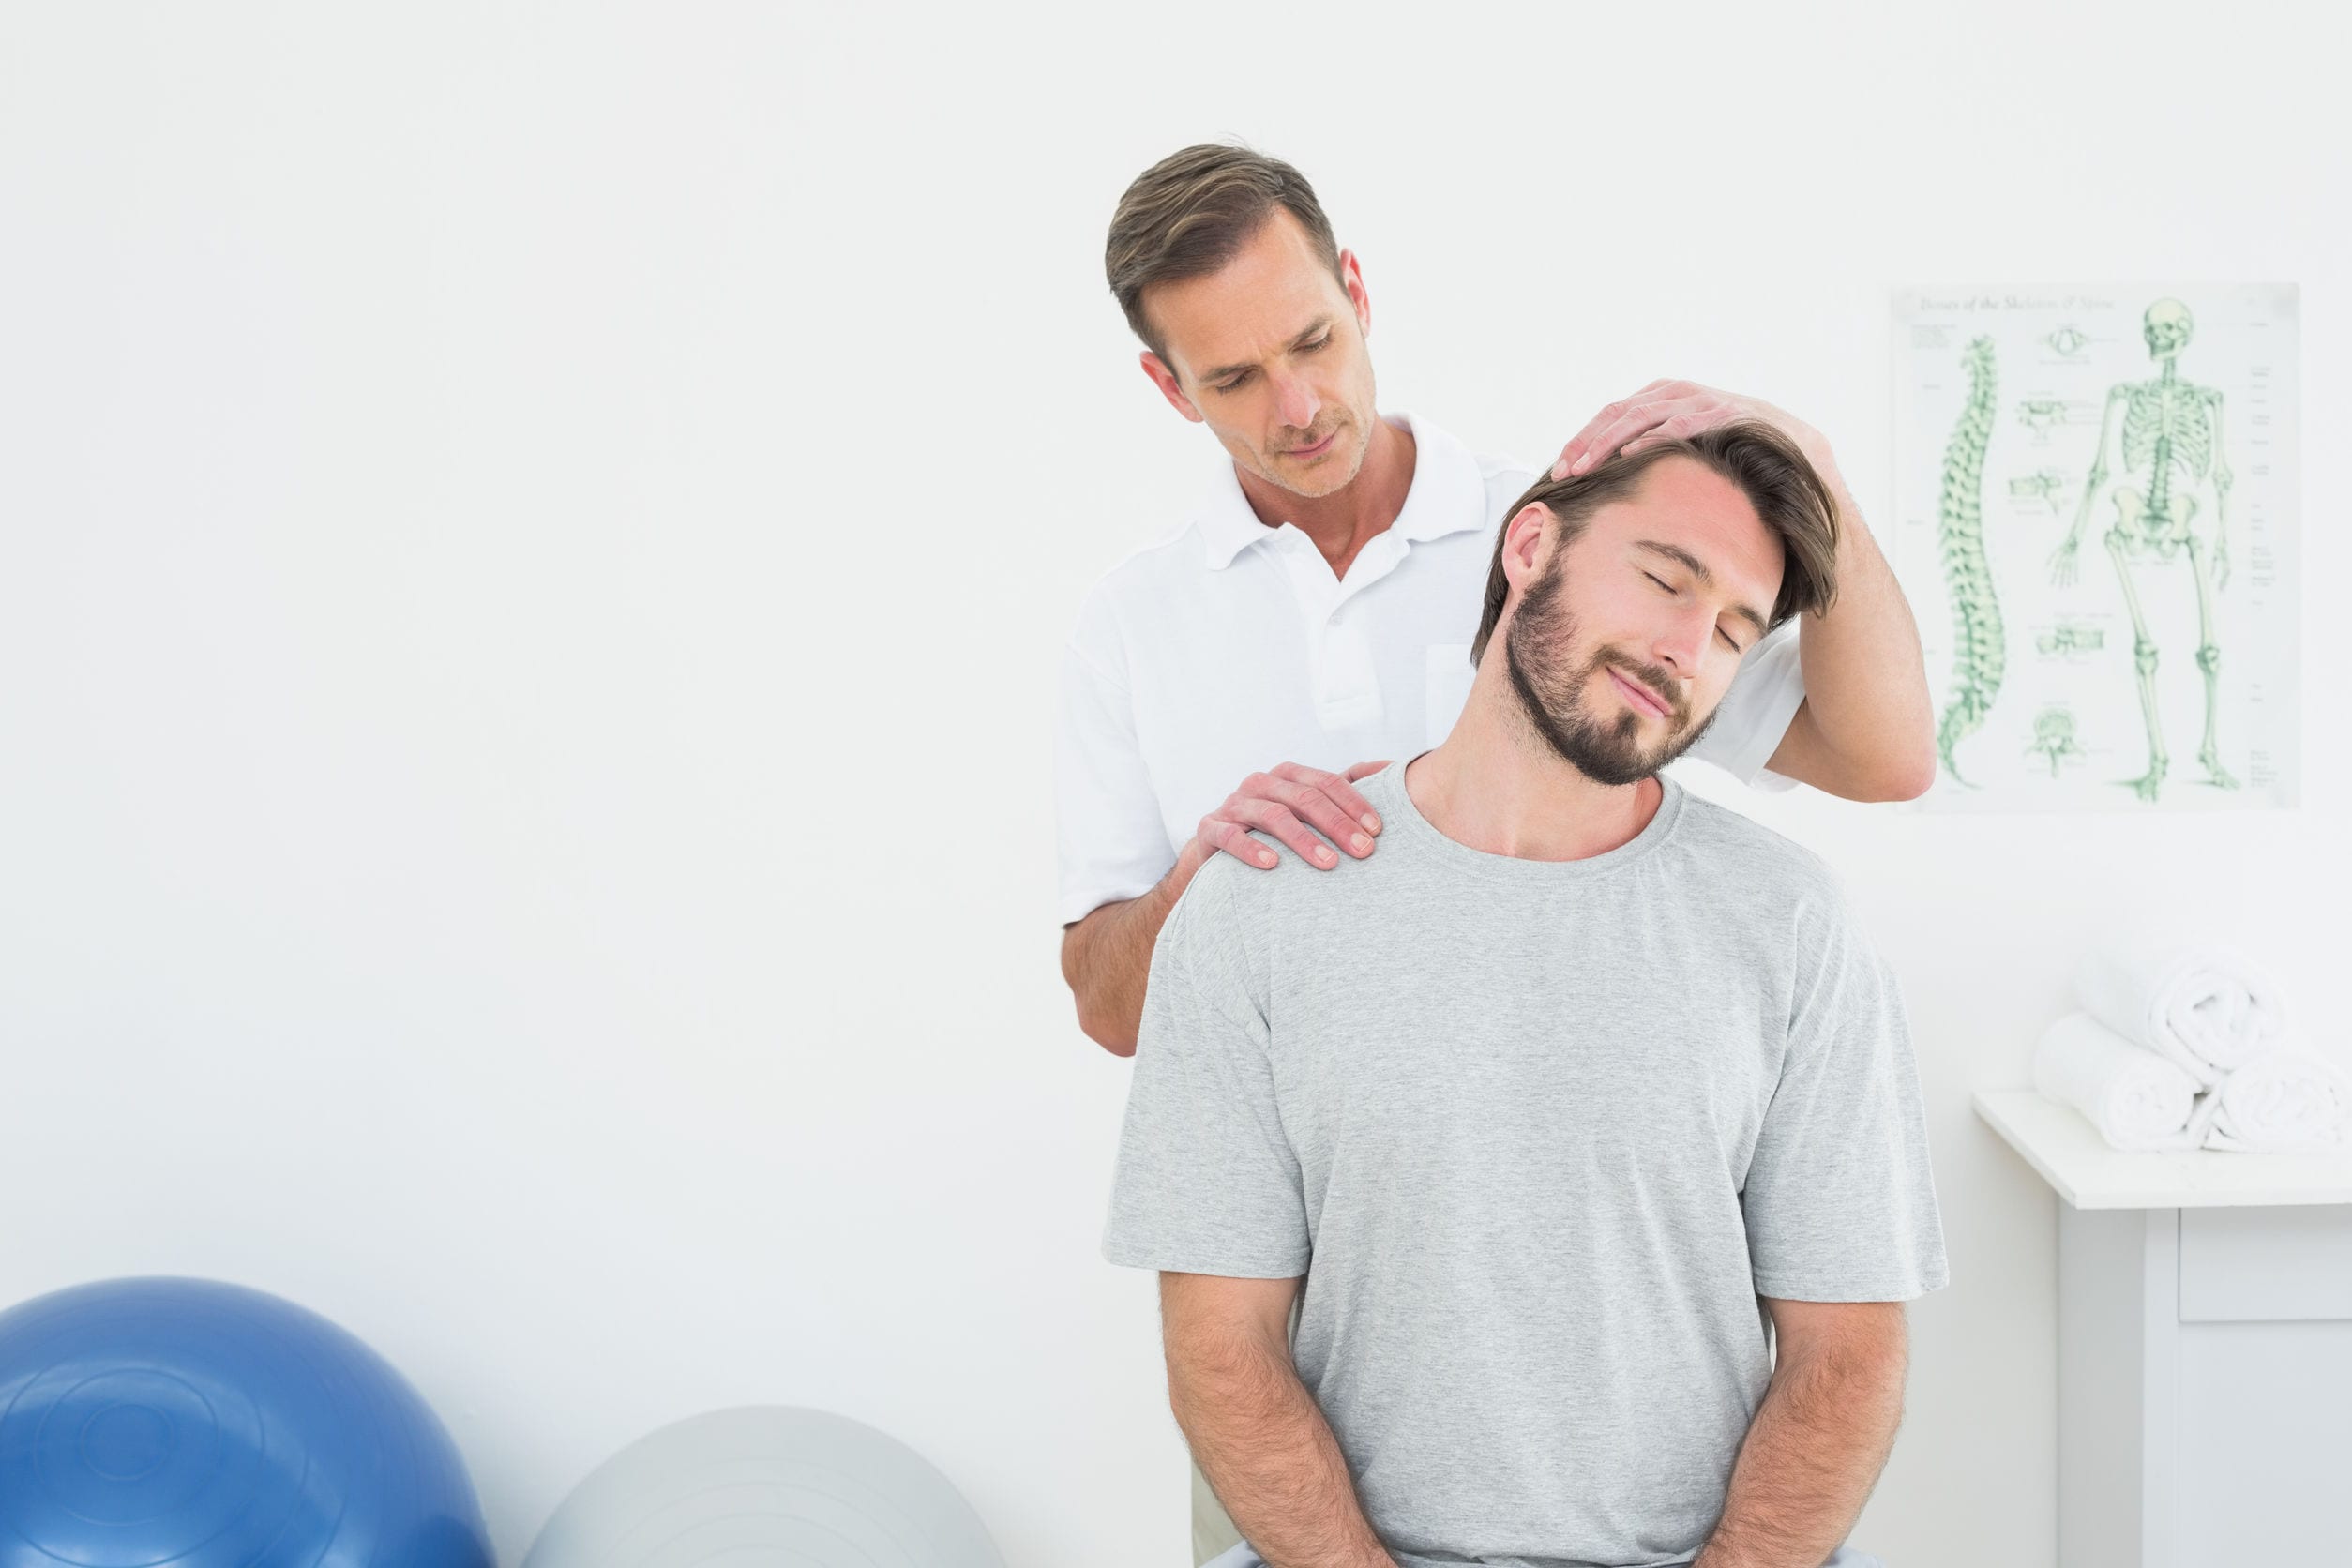 Auto Accident Claims in Florida Benefit from Chiropractic Care, Too